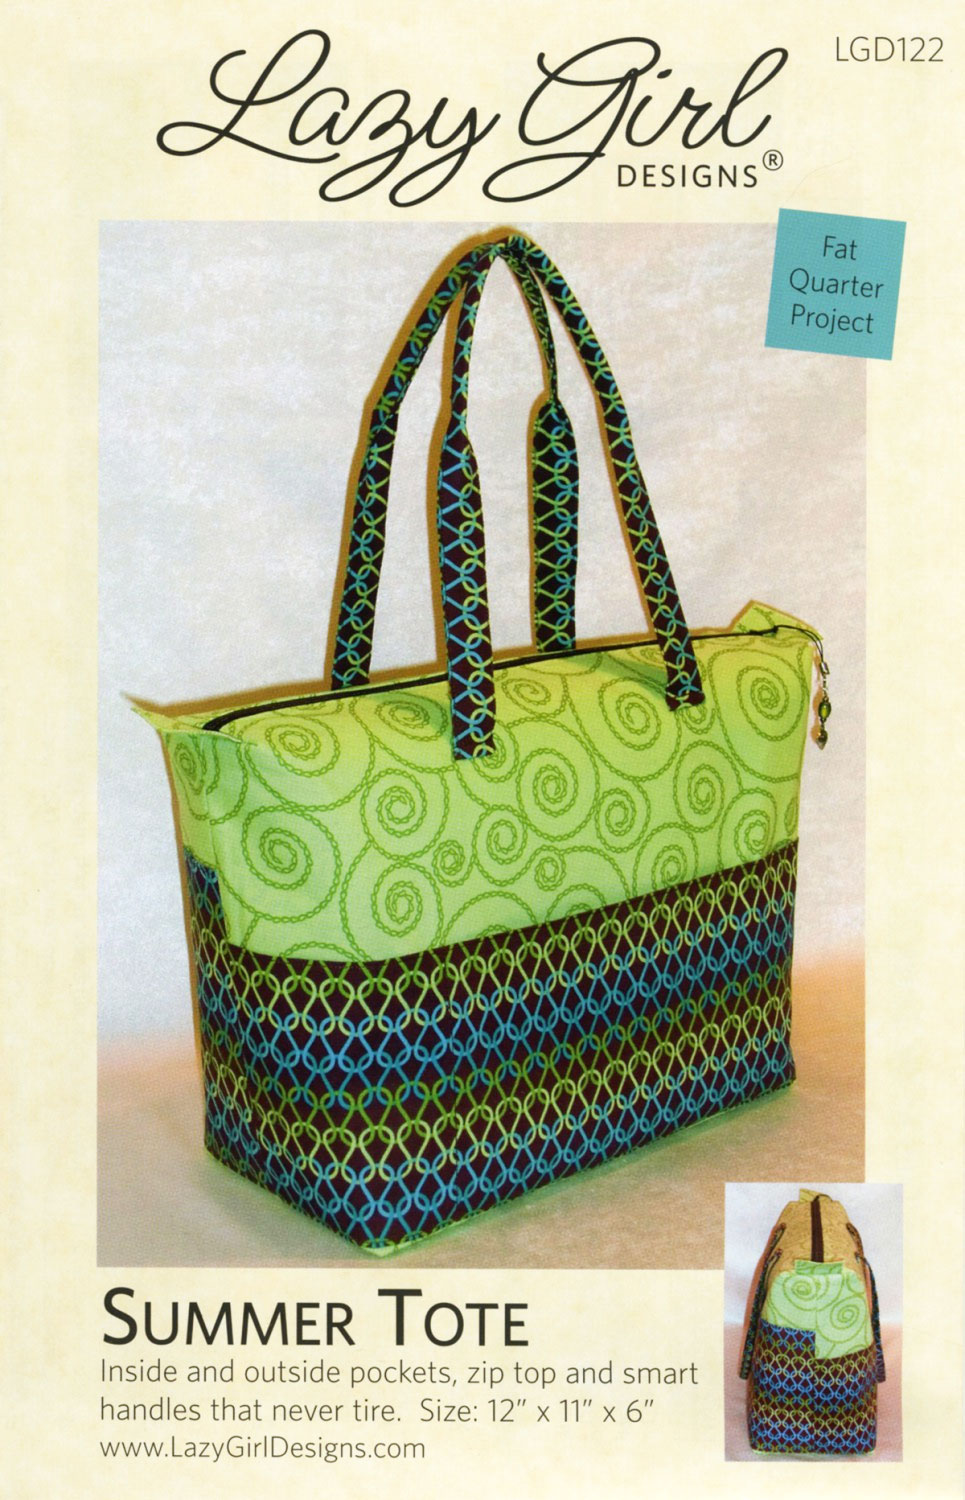 Summer Tote sewing pattern from Lazy Girl Designs